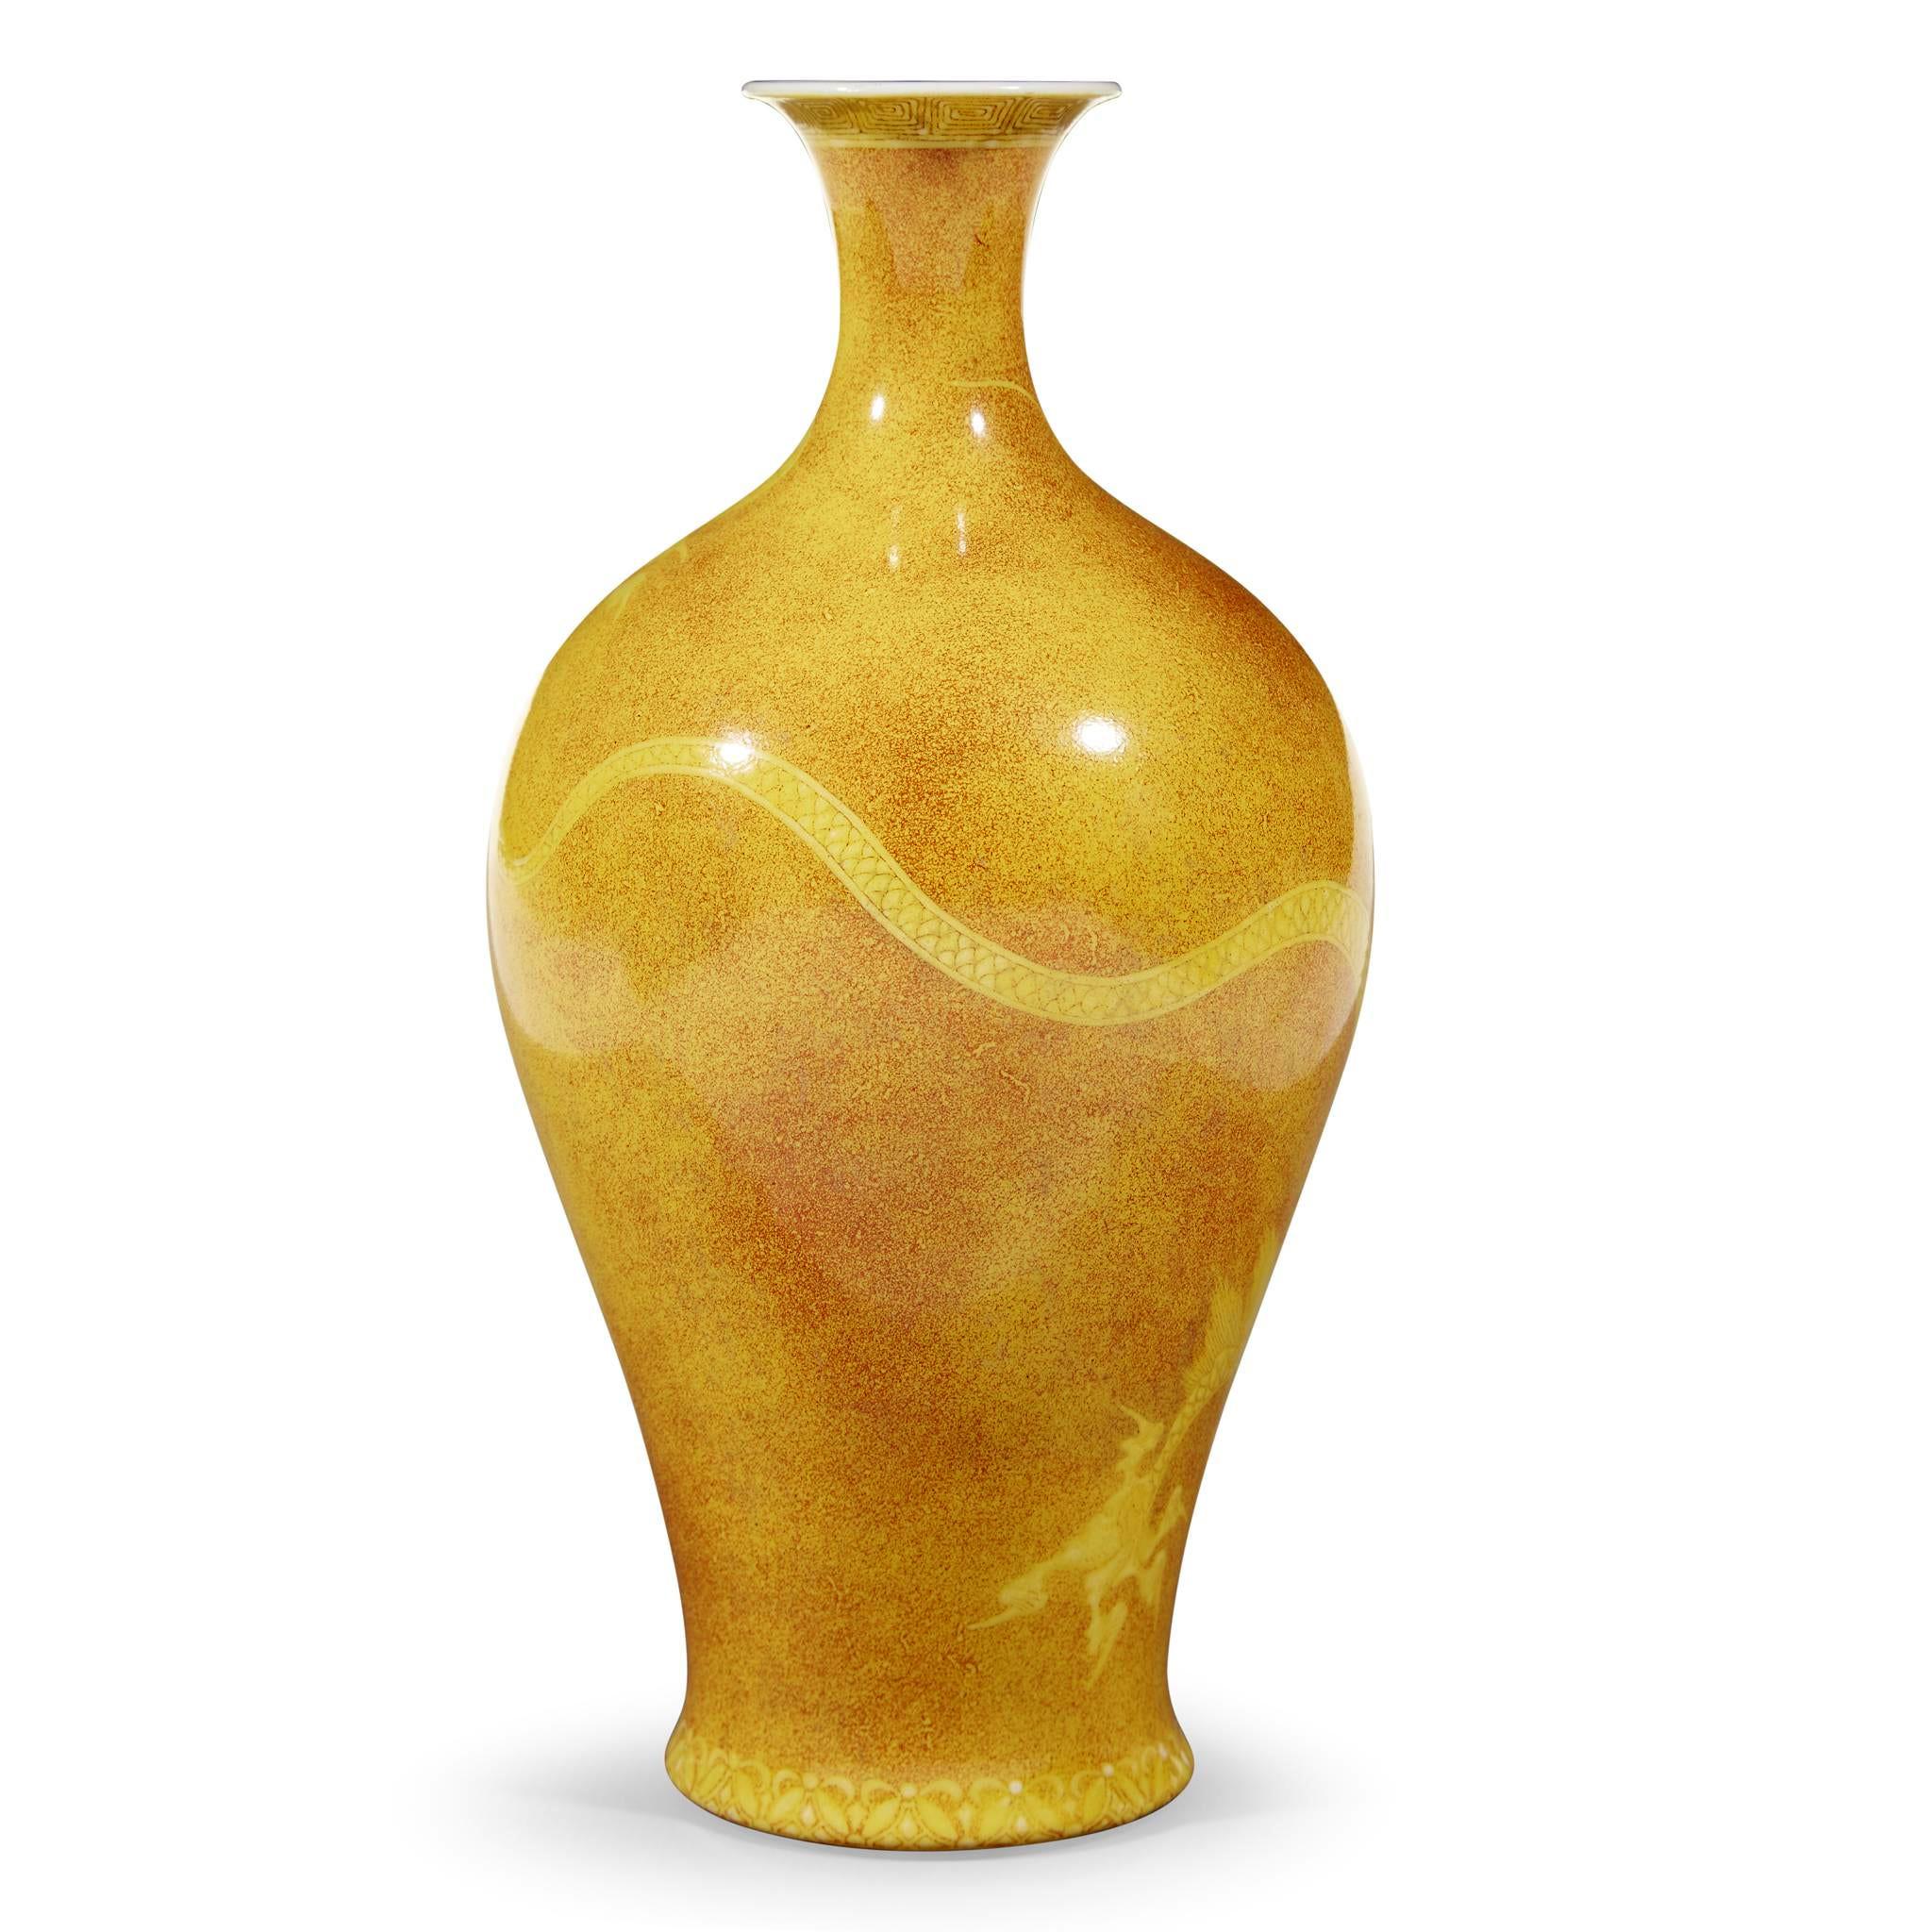 A porcelain vase in brilliant yellow color with dragon motif by legendary Japanese potter Makuzu Kozan (1842-1916) circa 1901. The vase is made in a classic elongated baluster form and decorated in an unusual yellow monochrome enamel. A flying